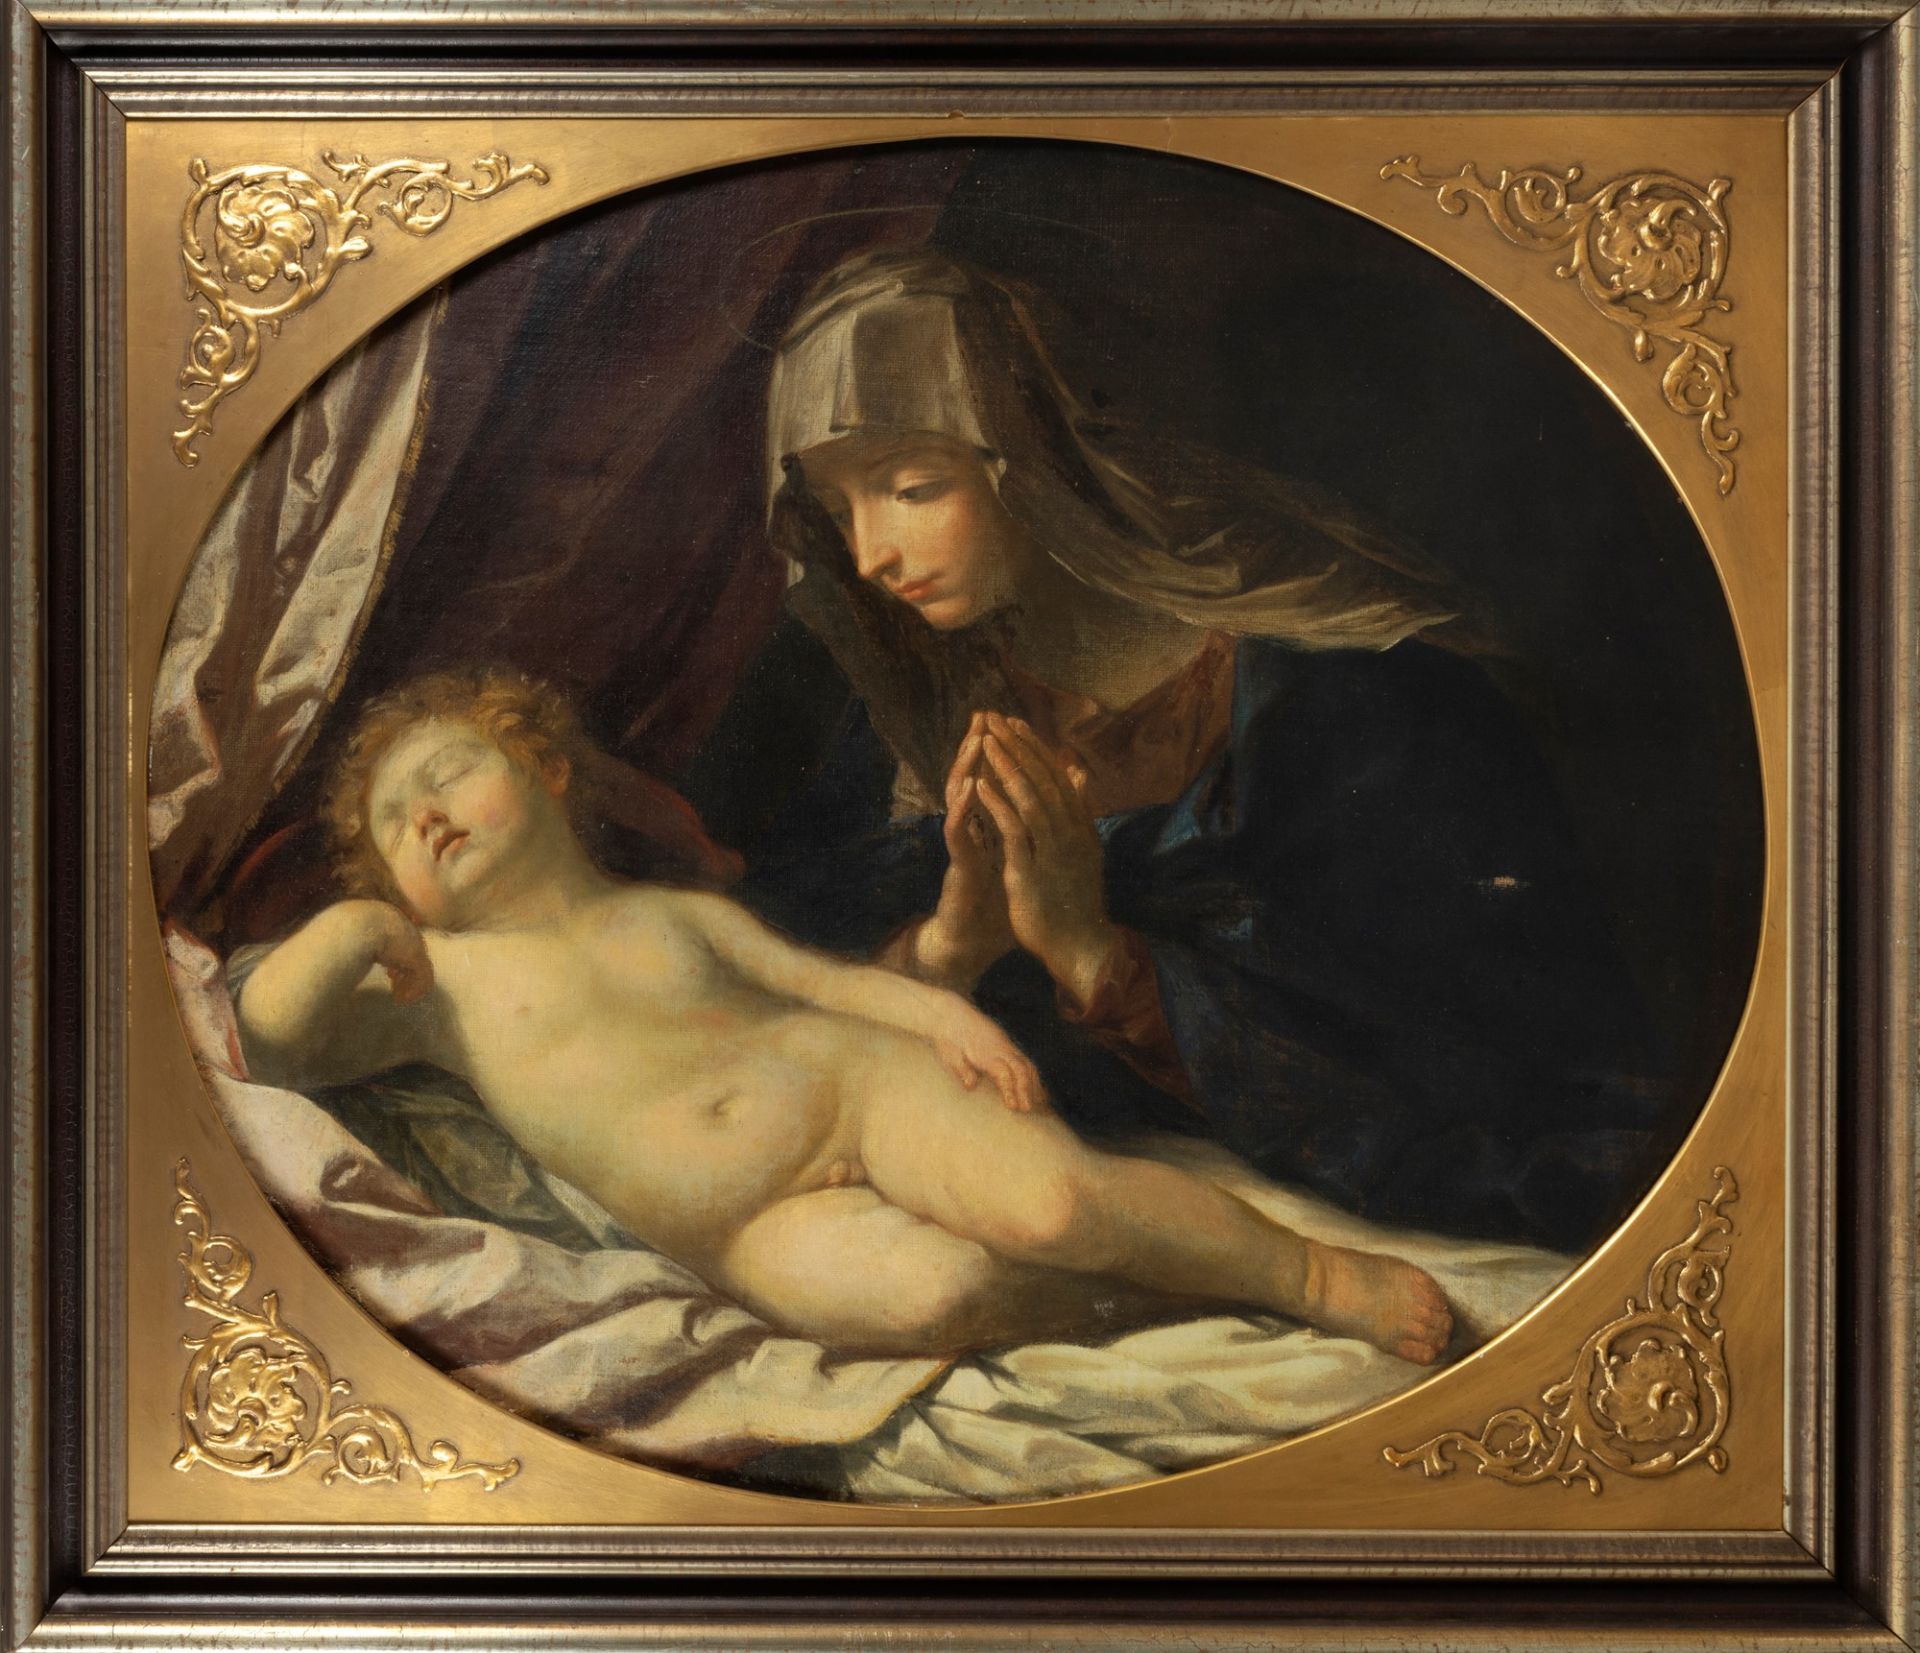 Emilian school, XVII century, after Guido Reni - Madonna in adoration of the sleeping Child - Image 3 of 3